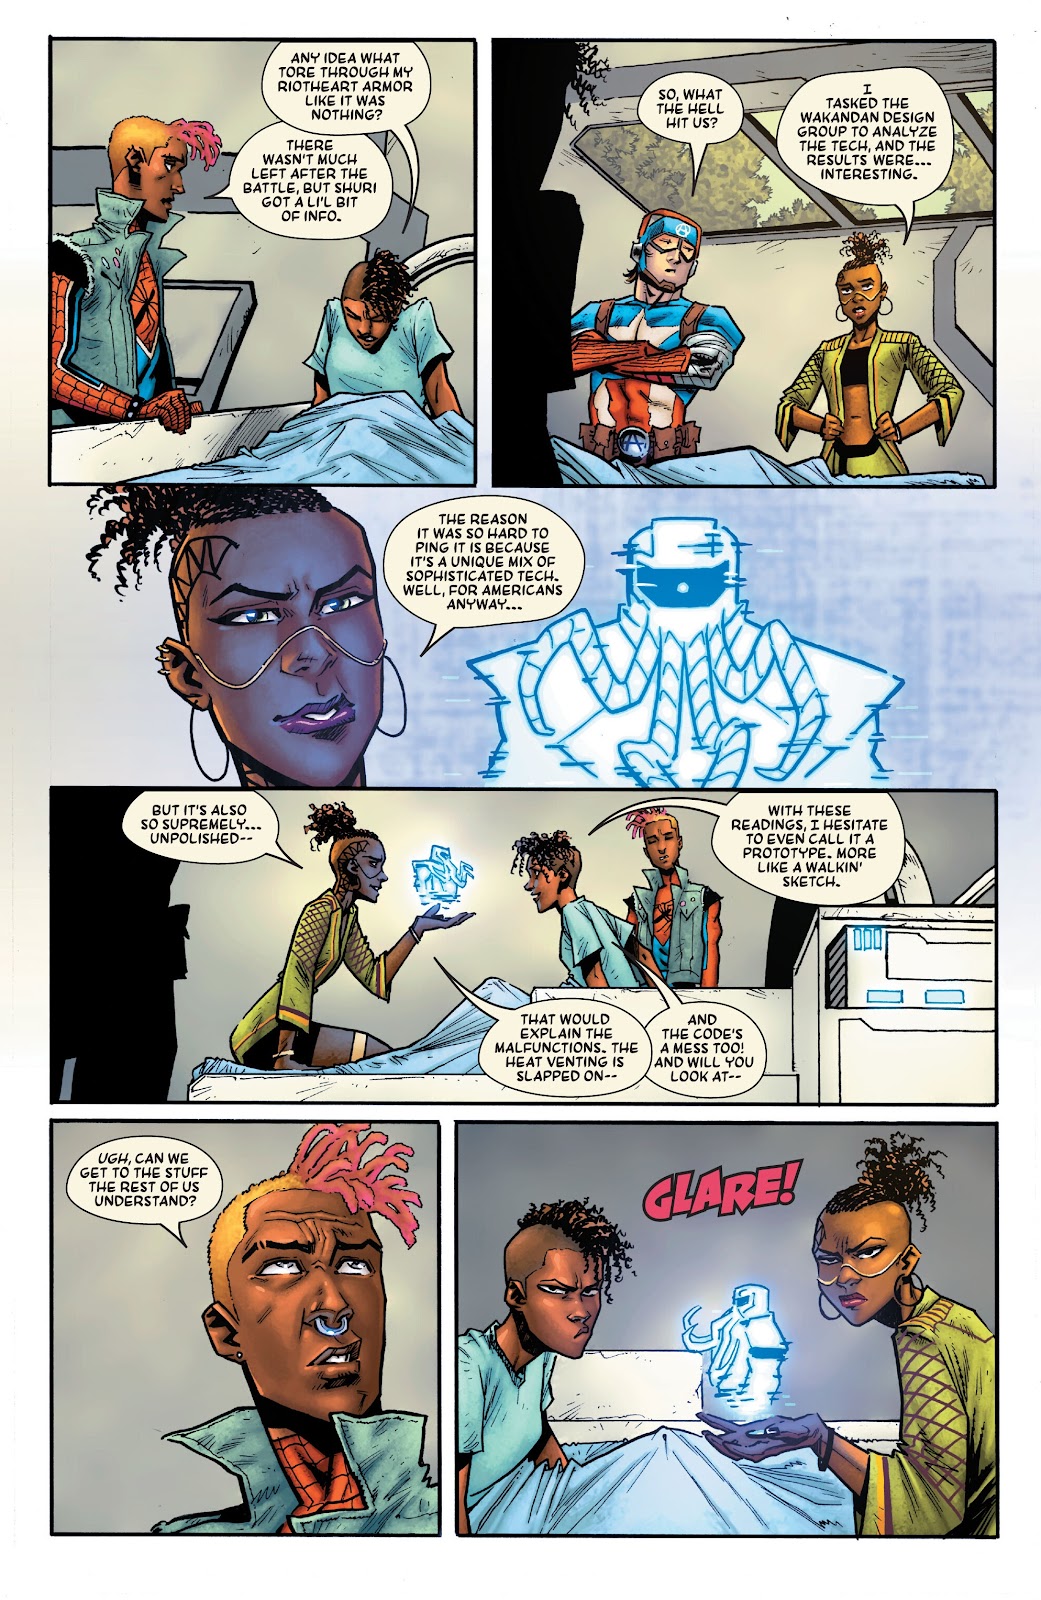 Spider-Punk: Arms Race issue 2 - Page 7